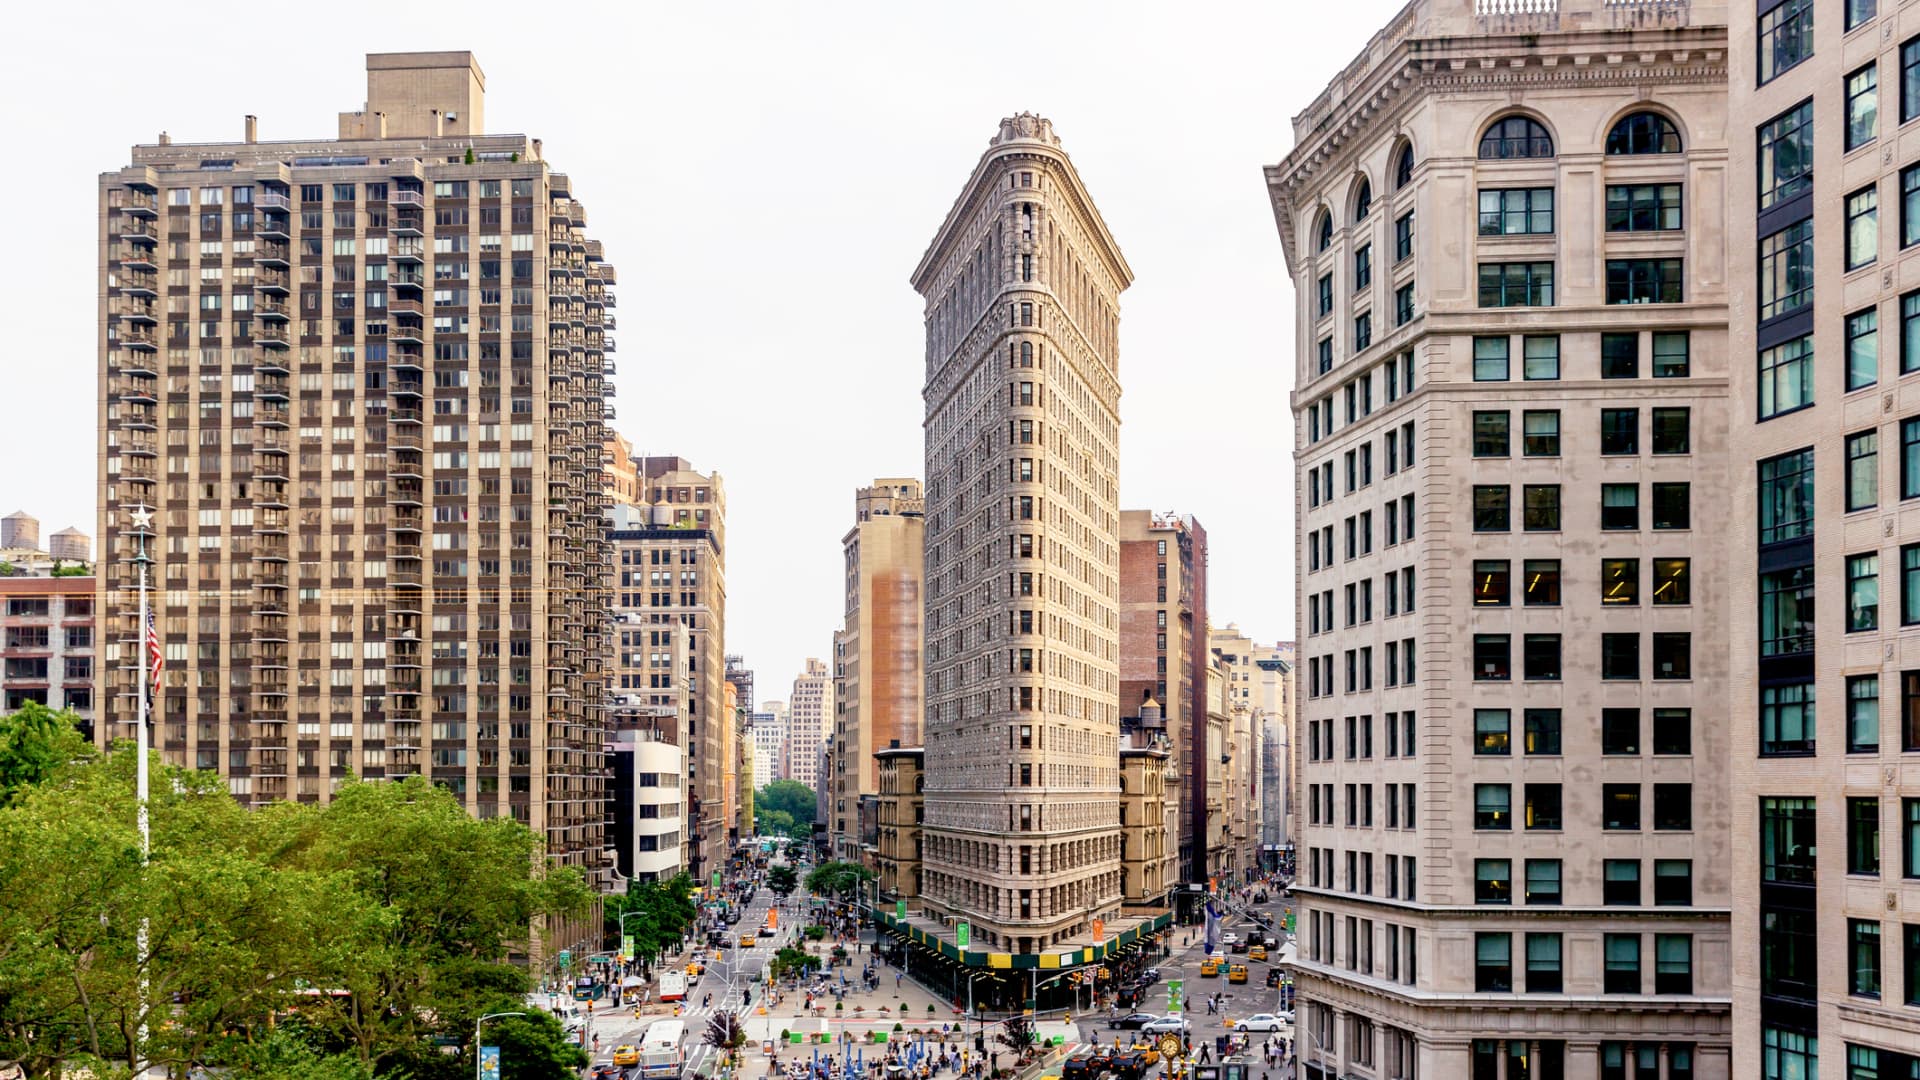 The Flatiron Building was designed by Daniel Burnham and Frederick Dinkelberg and completed in 1902.